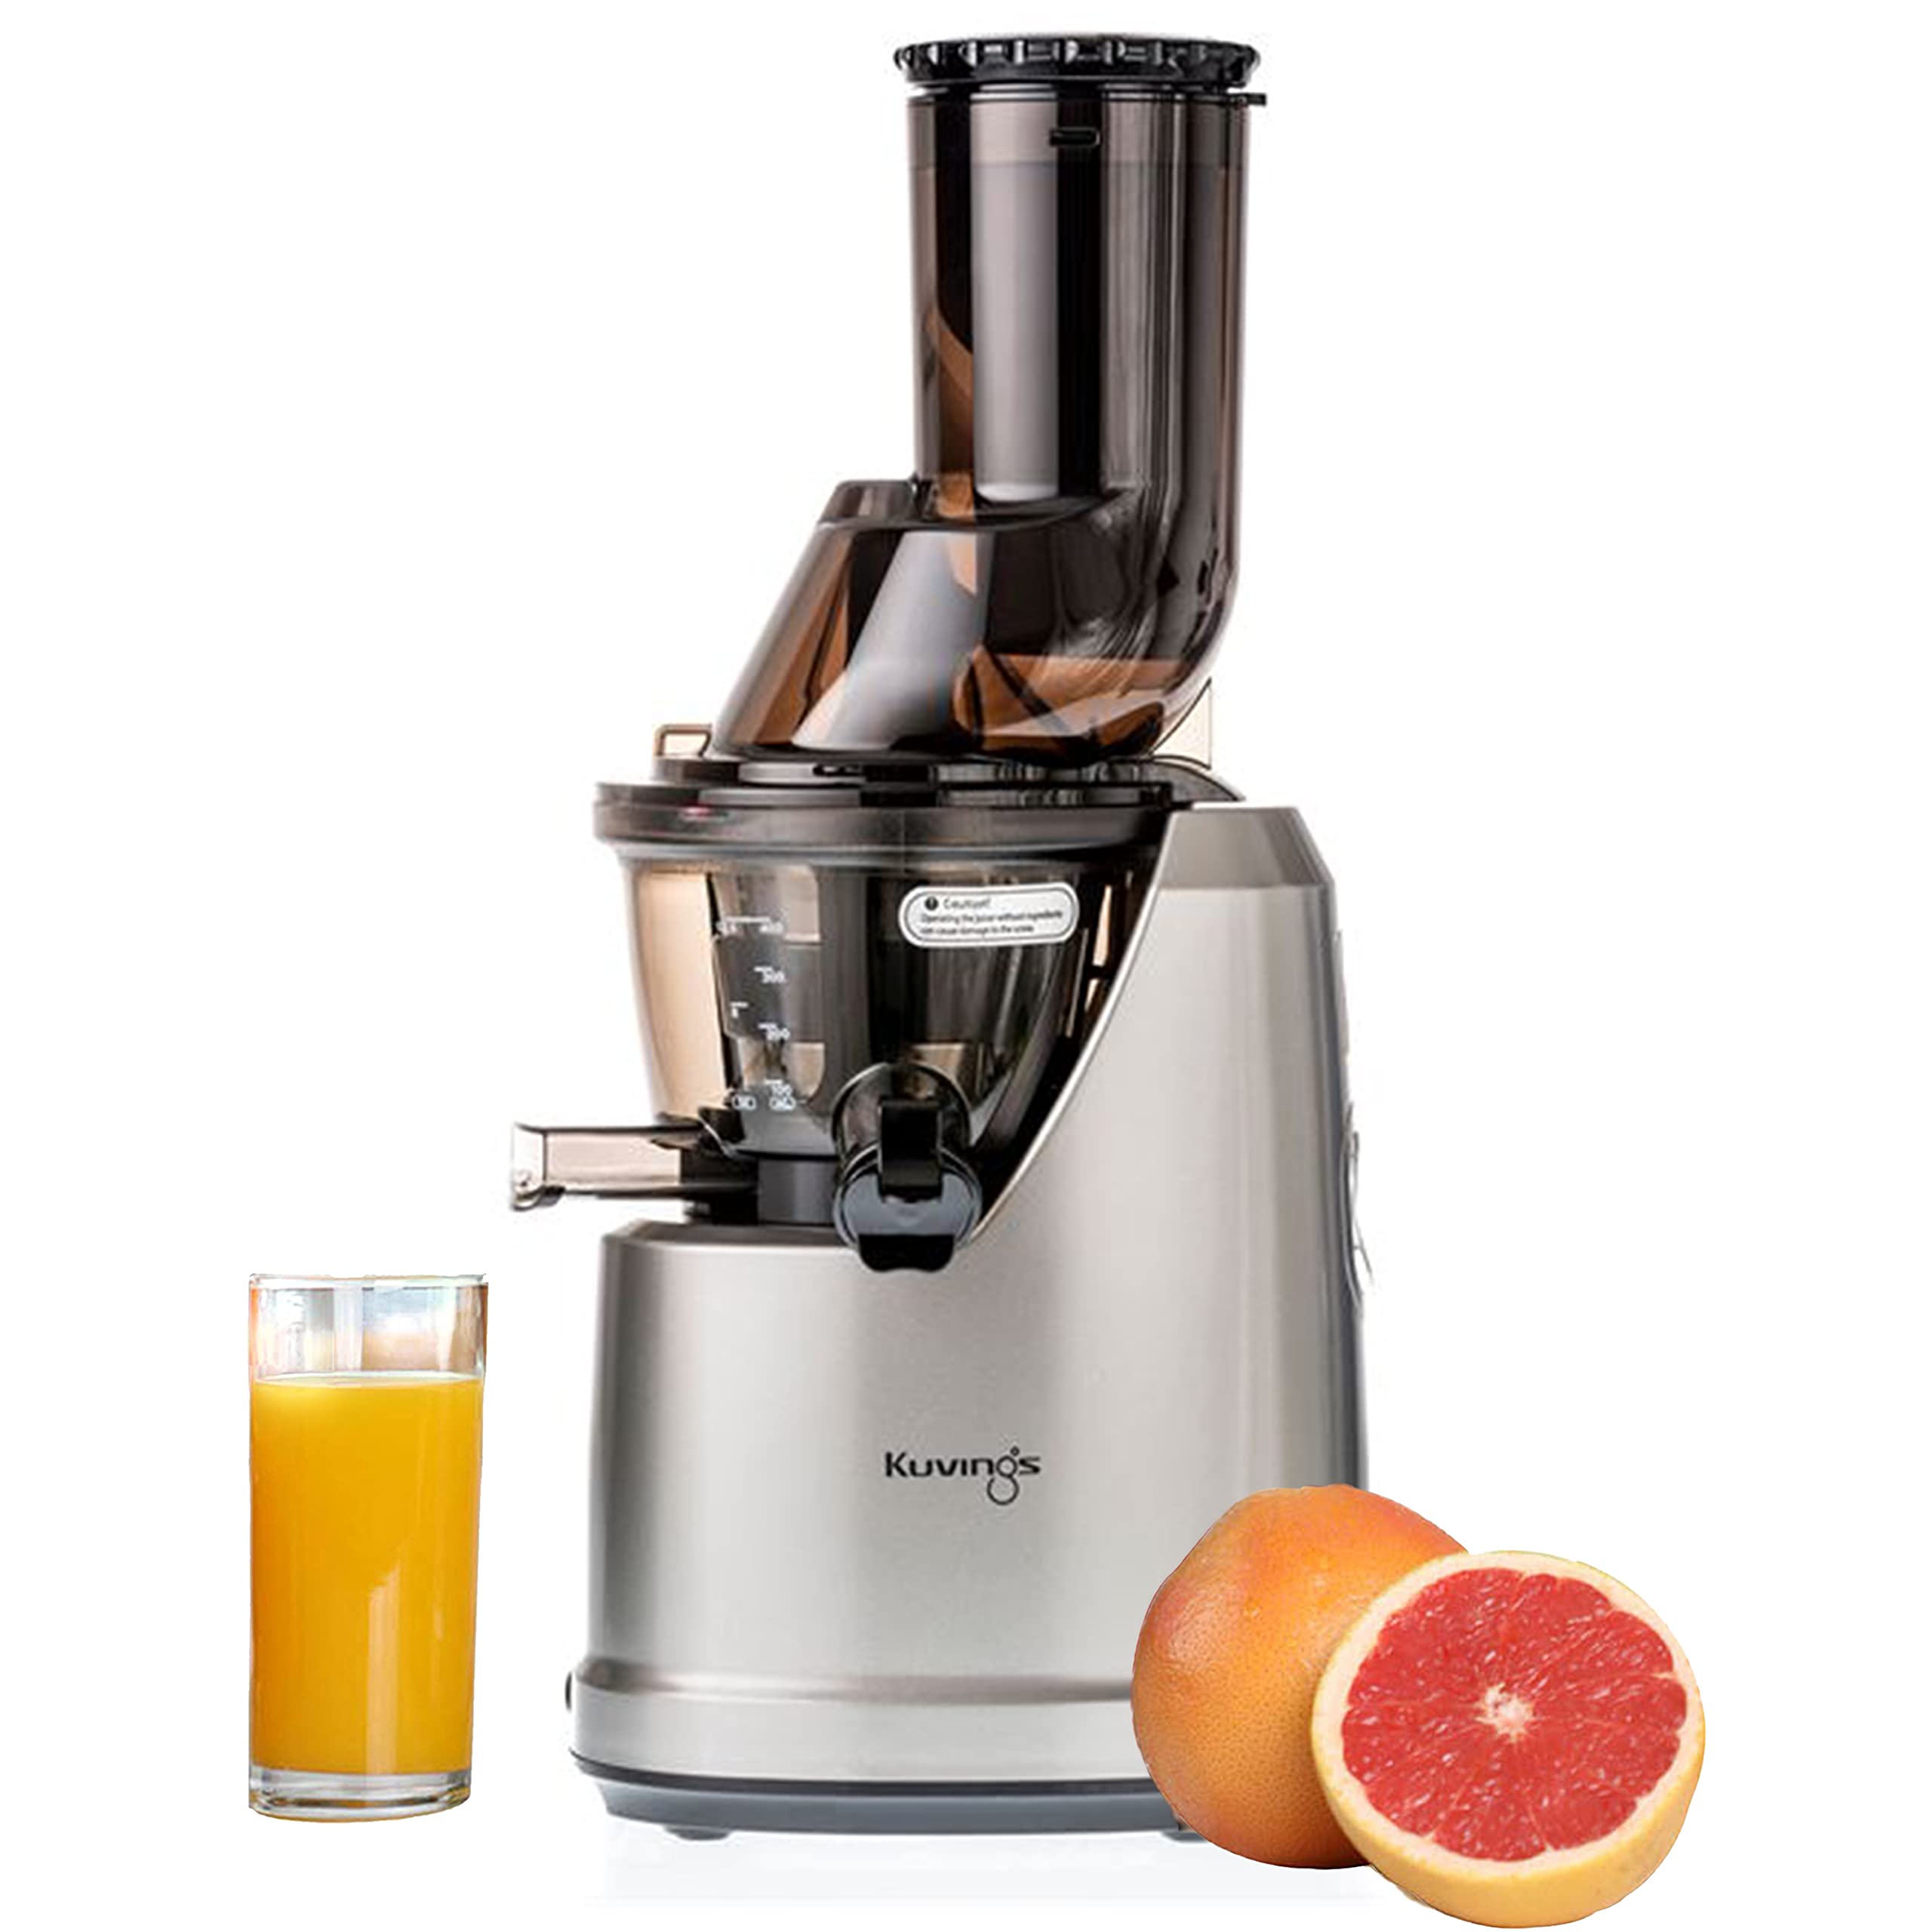 Kuvings B1700 Juicer slow-rotating masticating technology, 3-in-1 multi-function for juice, smoothie and sorbet 100% natural juices, smoothies, and nut milks, 2 manufacturer’s warranty